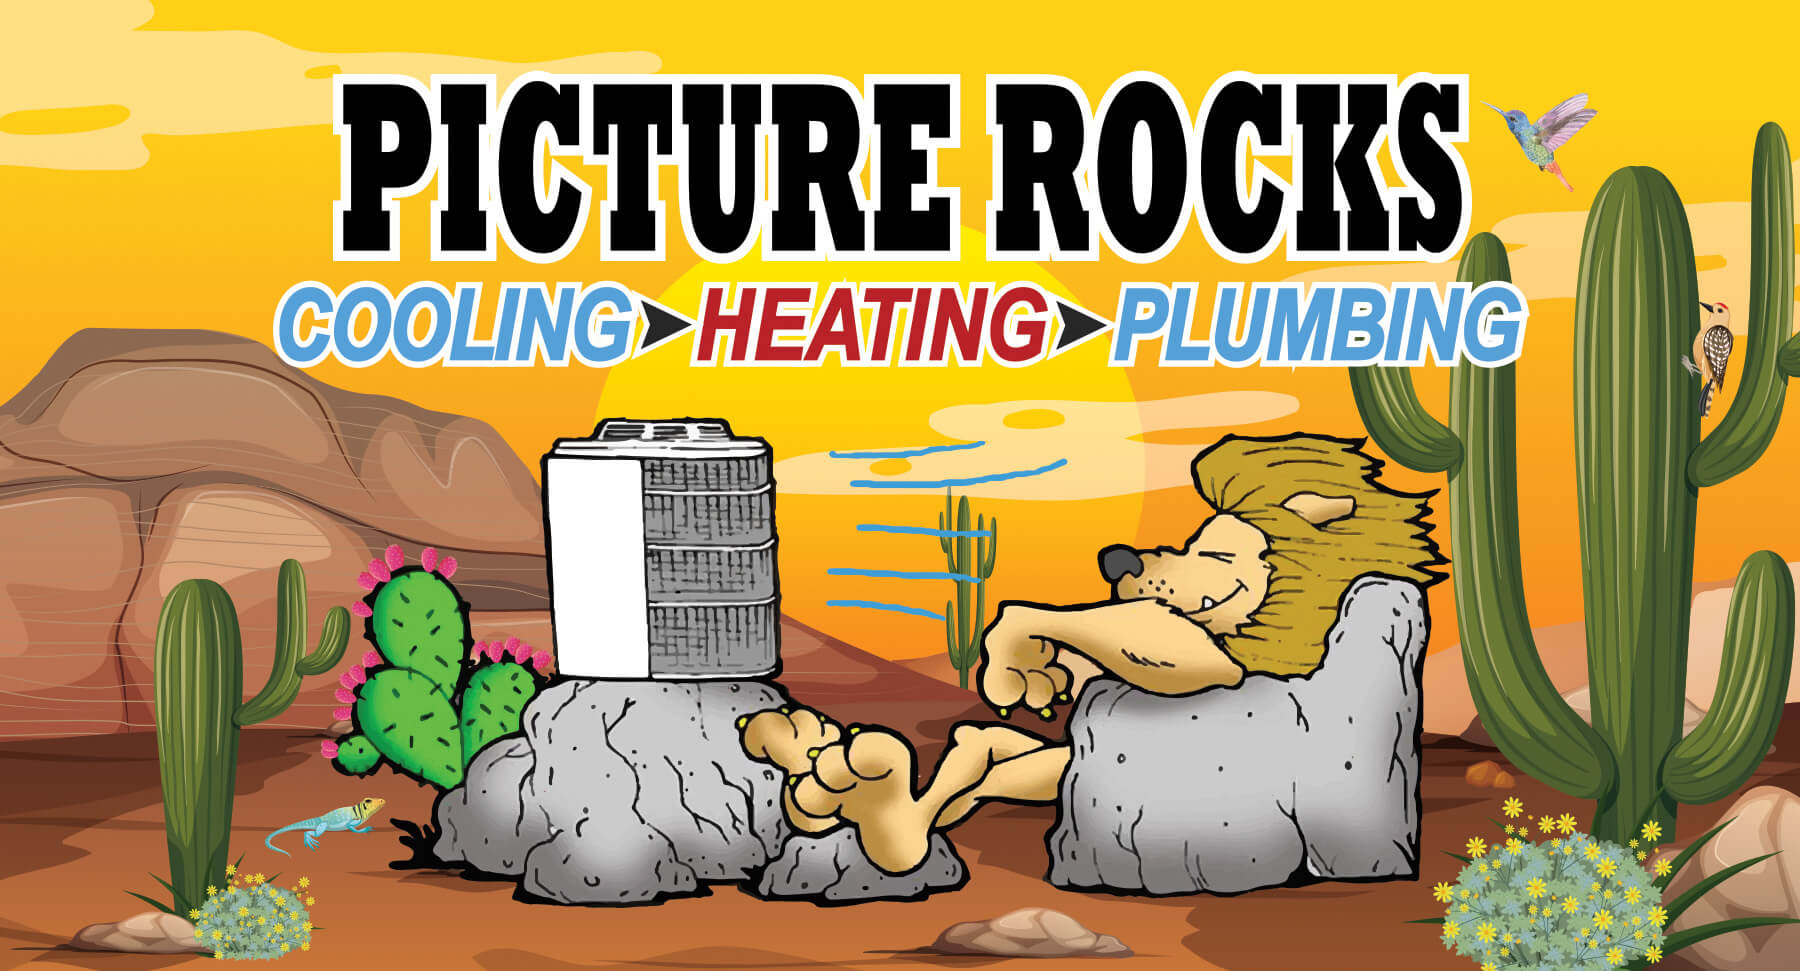 Picture Rocks Cooling Heating & Plumbing company logo